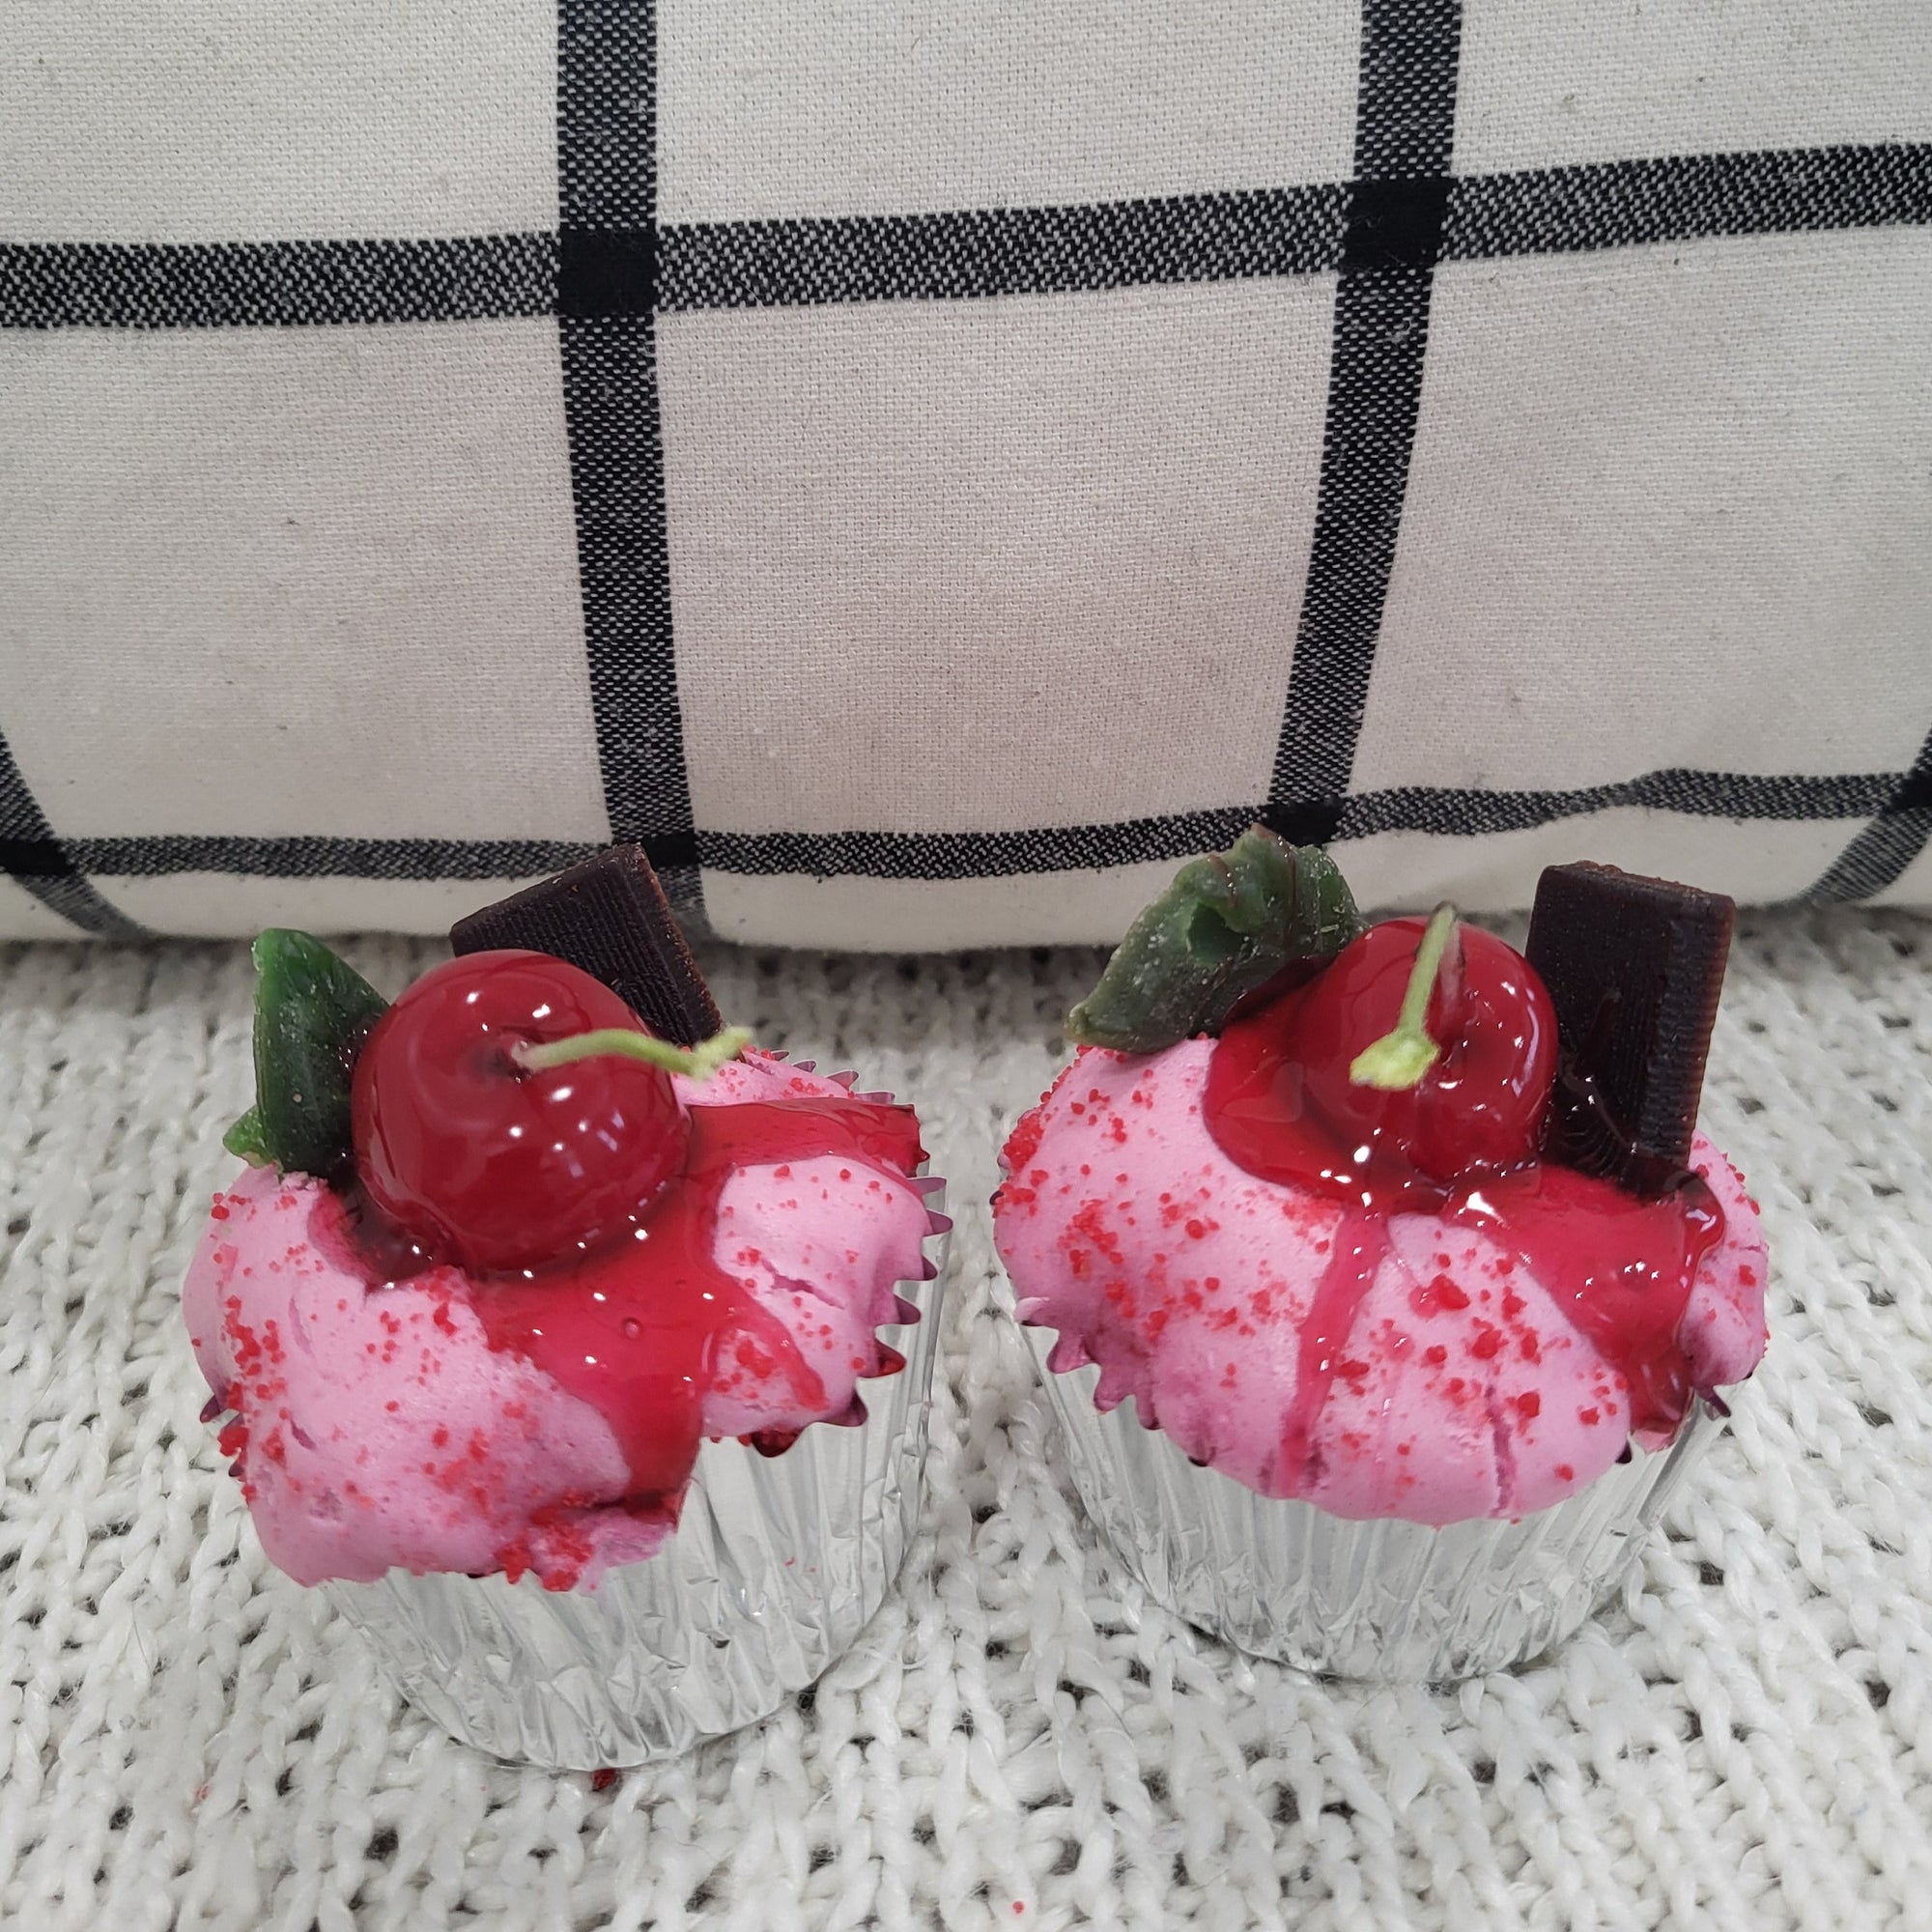 Pip Posh Faux Cherry Mint Raspberry Cupcakes Sweet Candle Collection Set Of 2